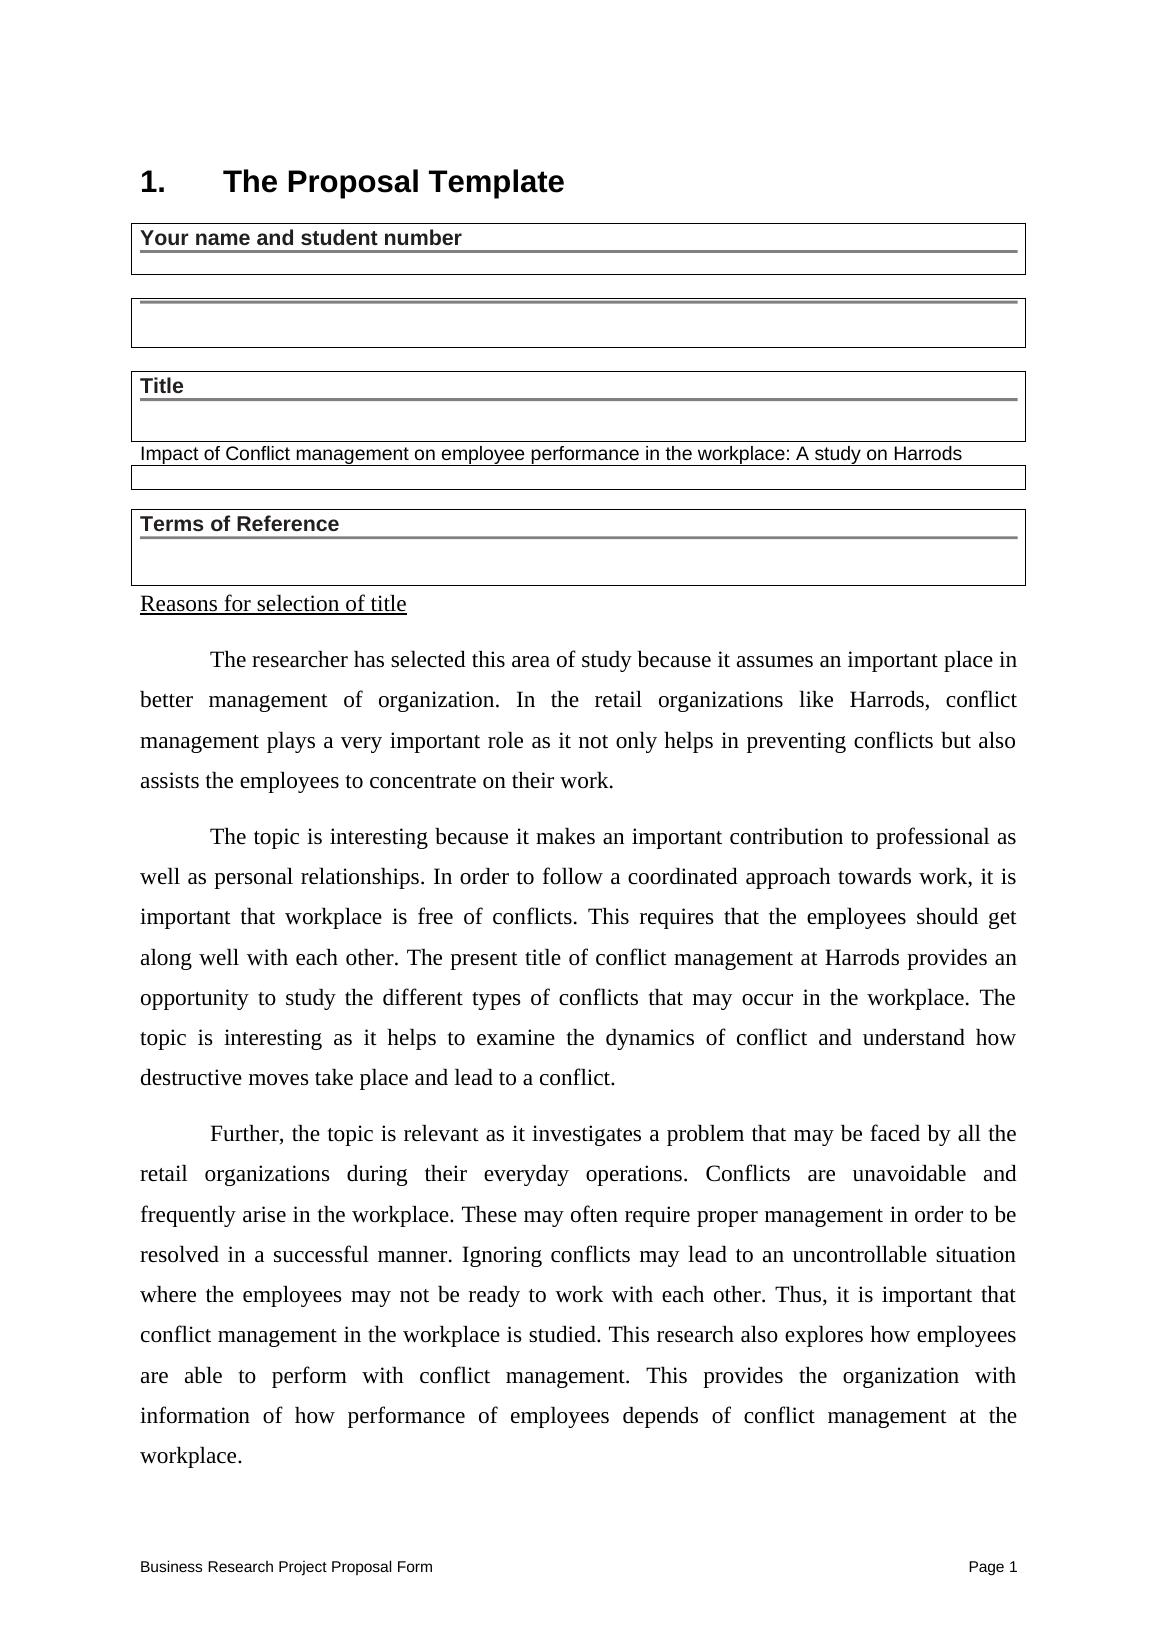 sample research proposal on conflict management